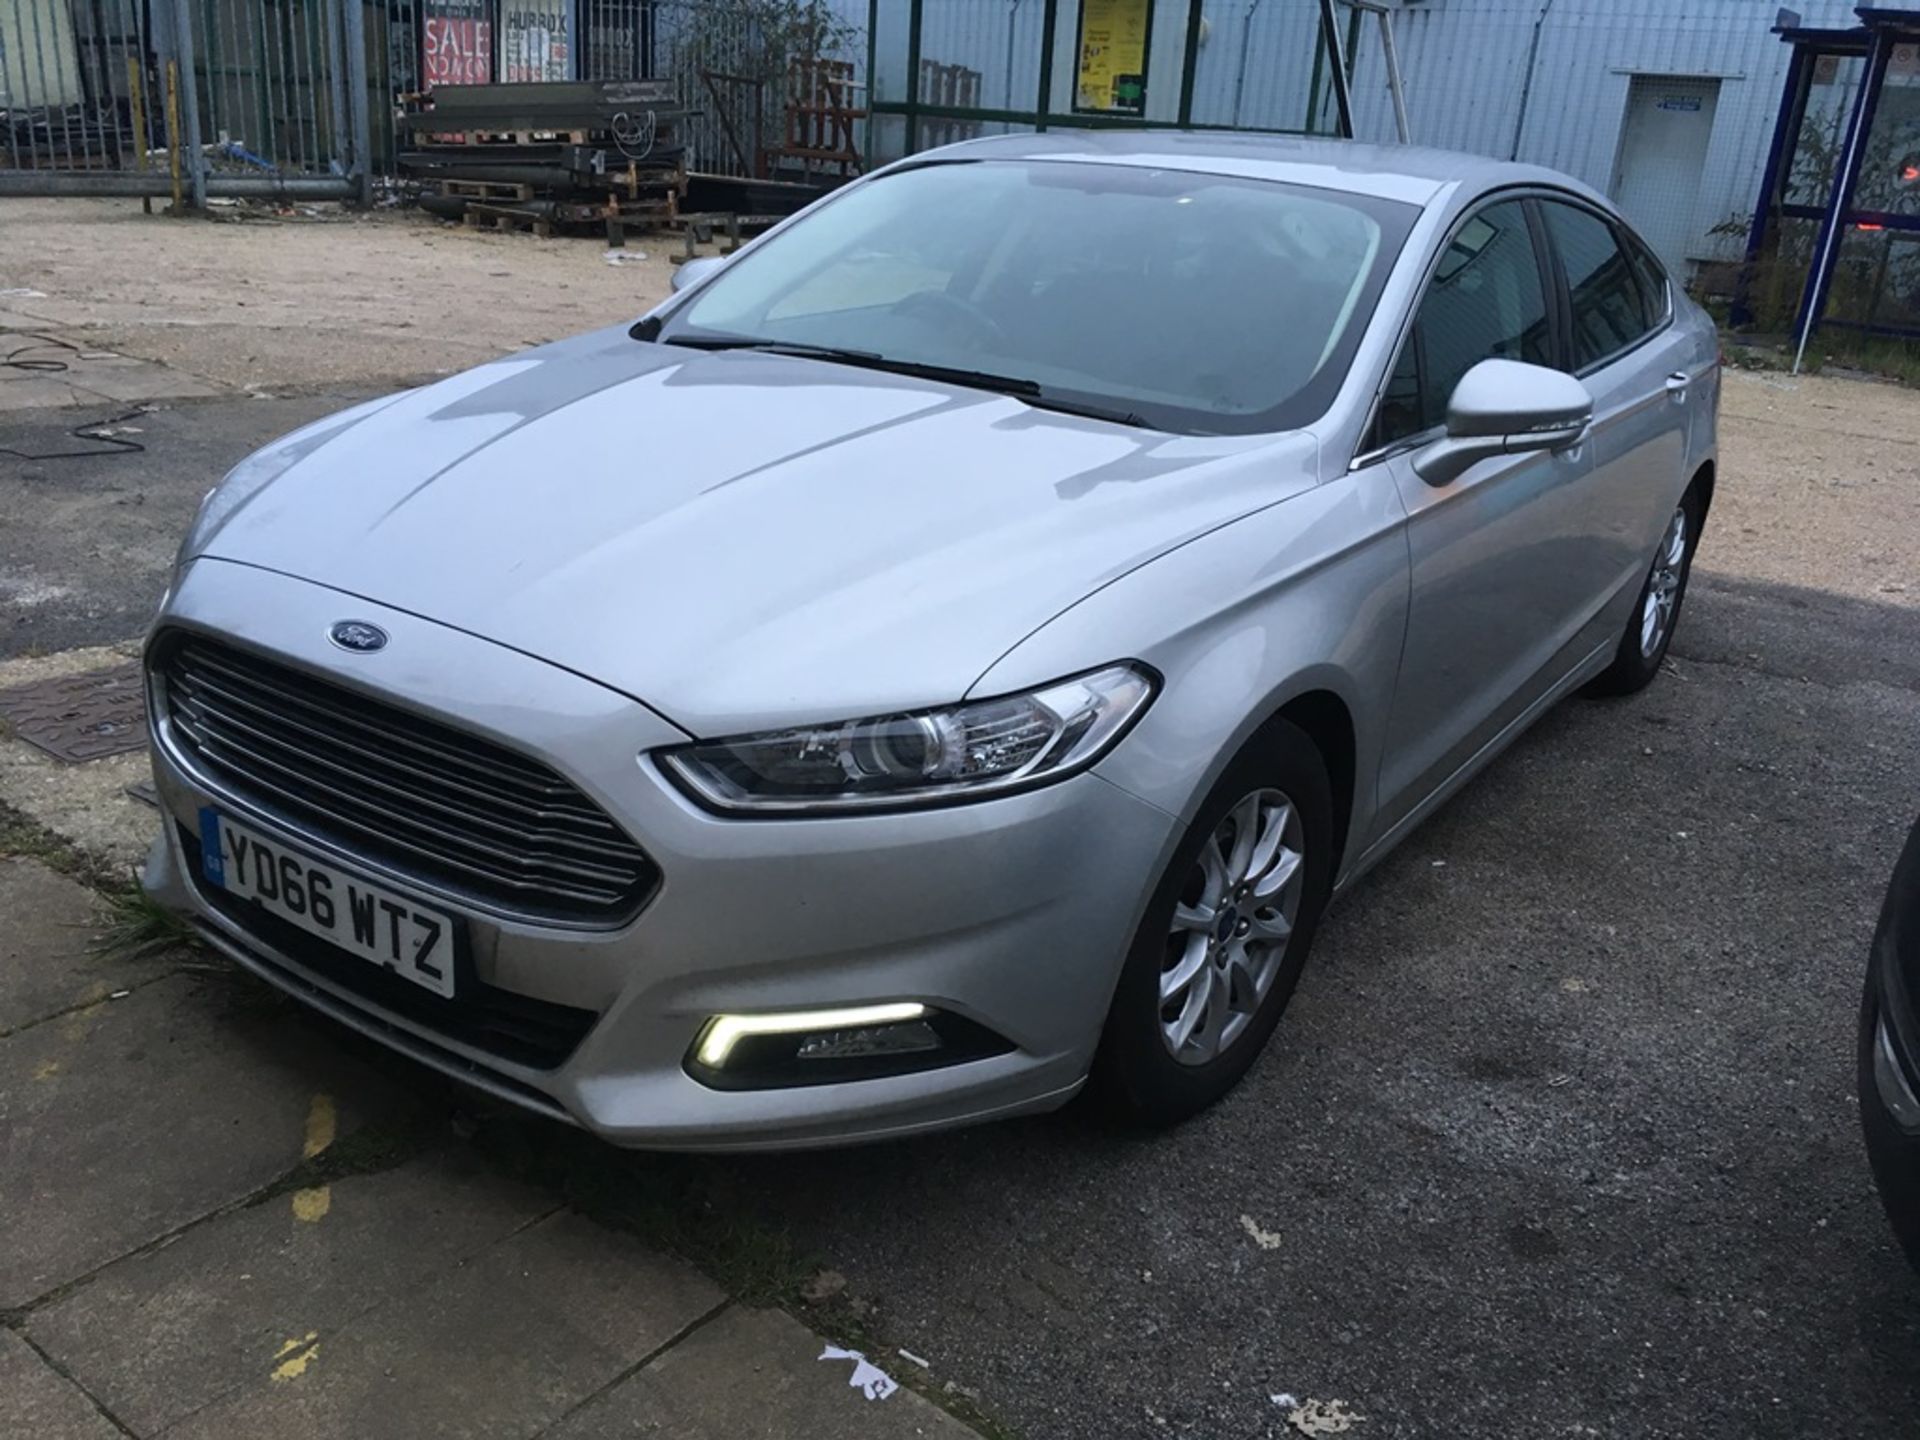 Ford Mondeo Zetec 1.5 litre TDCi 120ps Econetic diesel manual car, Registration: YD66 WTZ, Year of